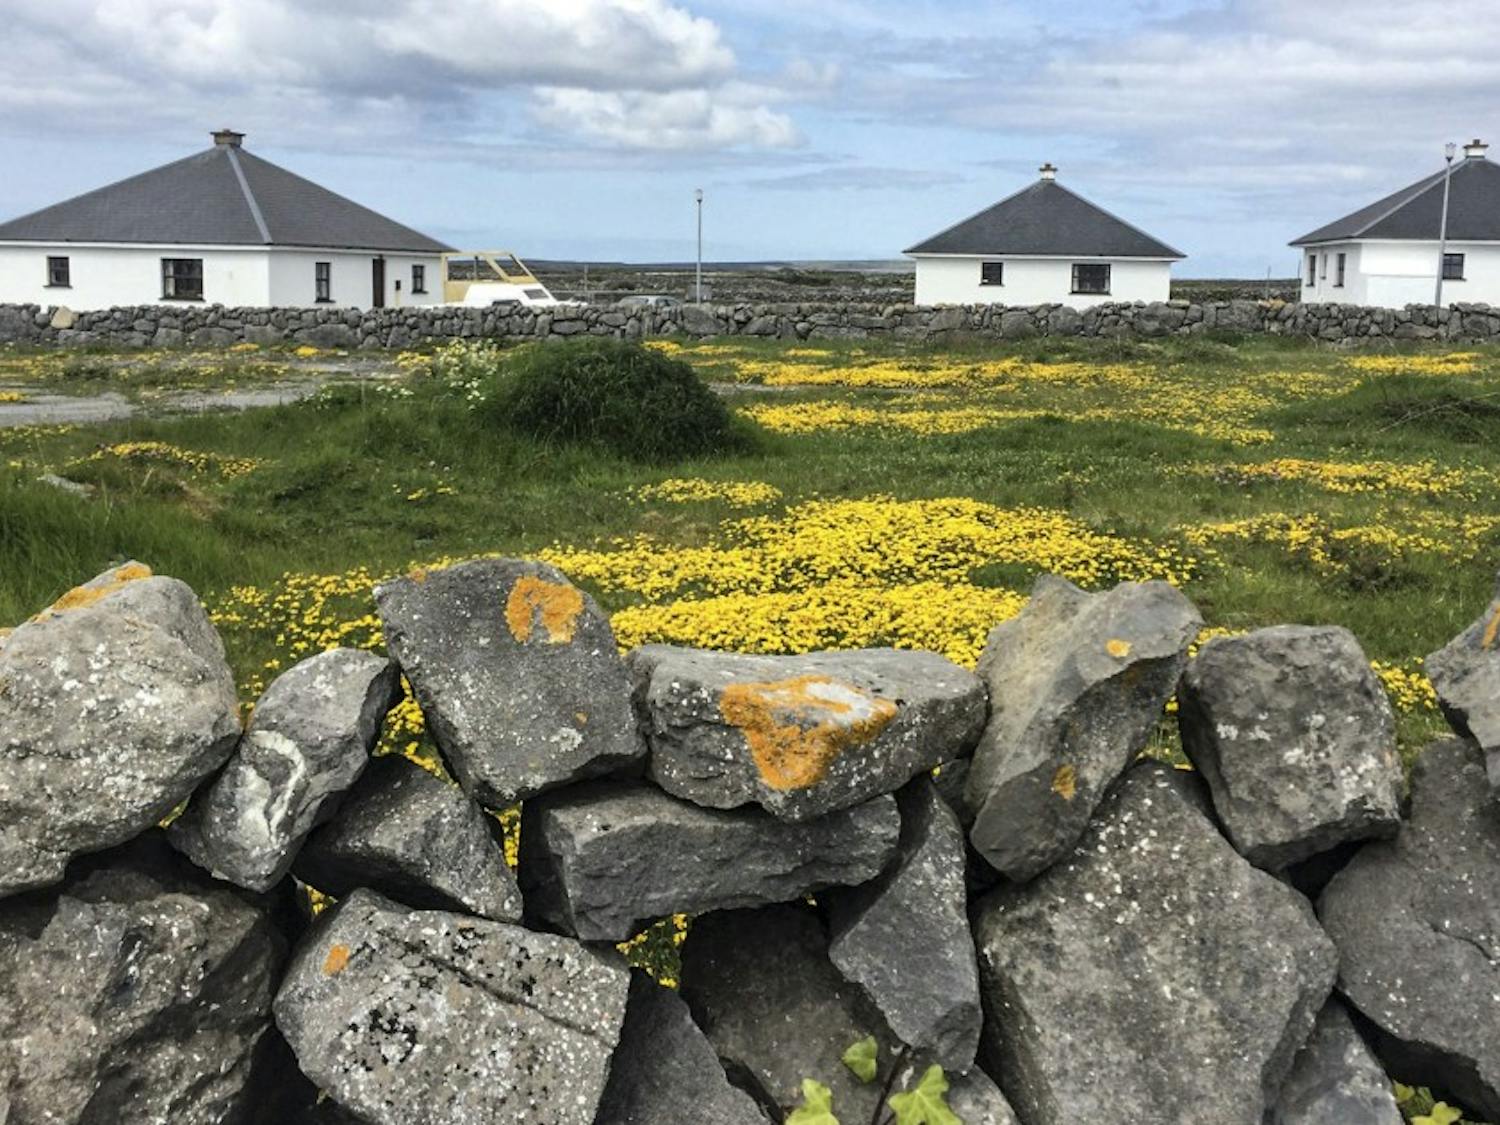 Buildings stand on Inishmaan, one of the Aran Islands, in May of 2016 during a mini-study abroad with the UNM Irish Studies Department.